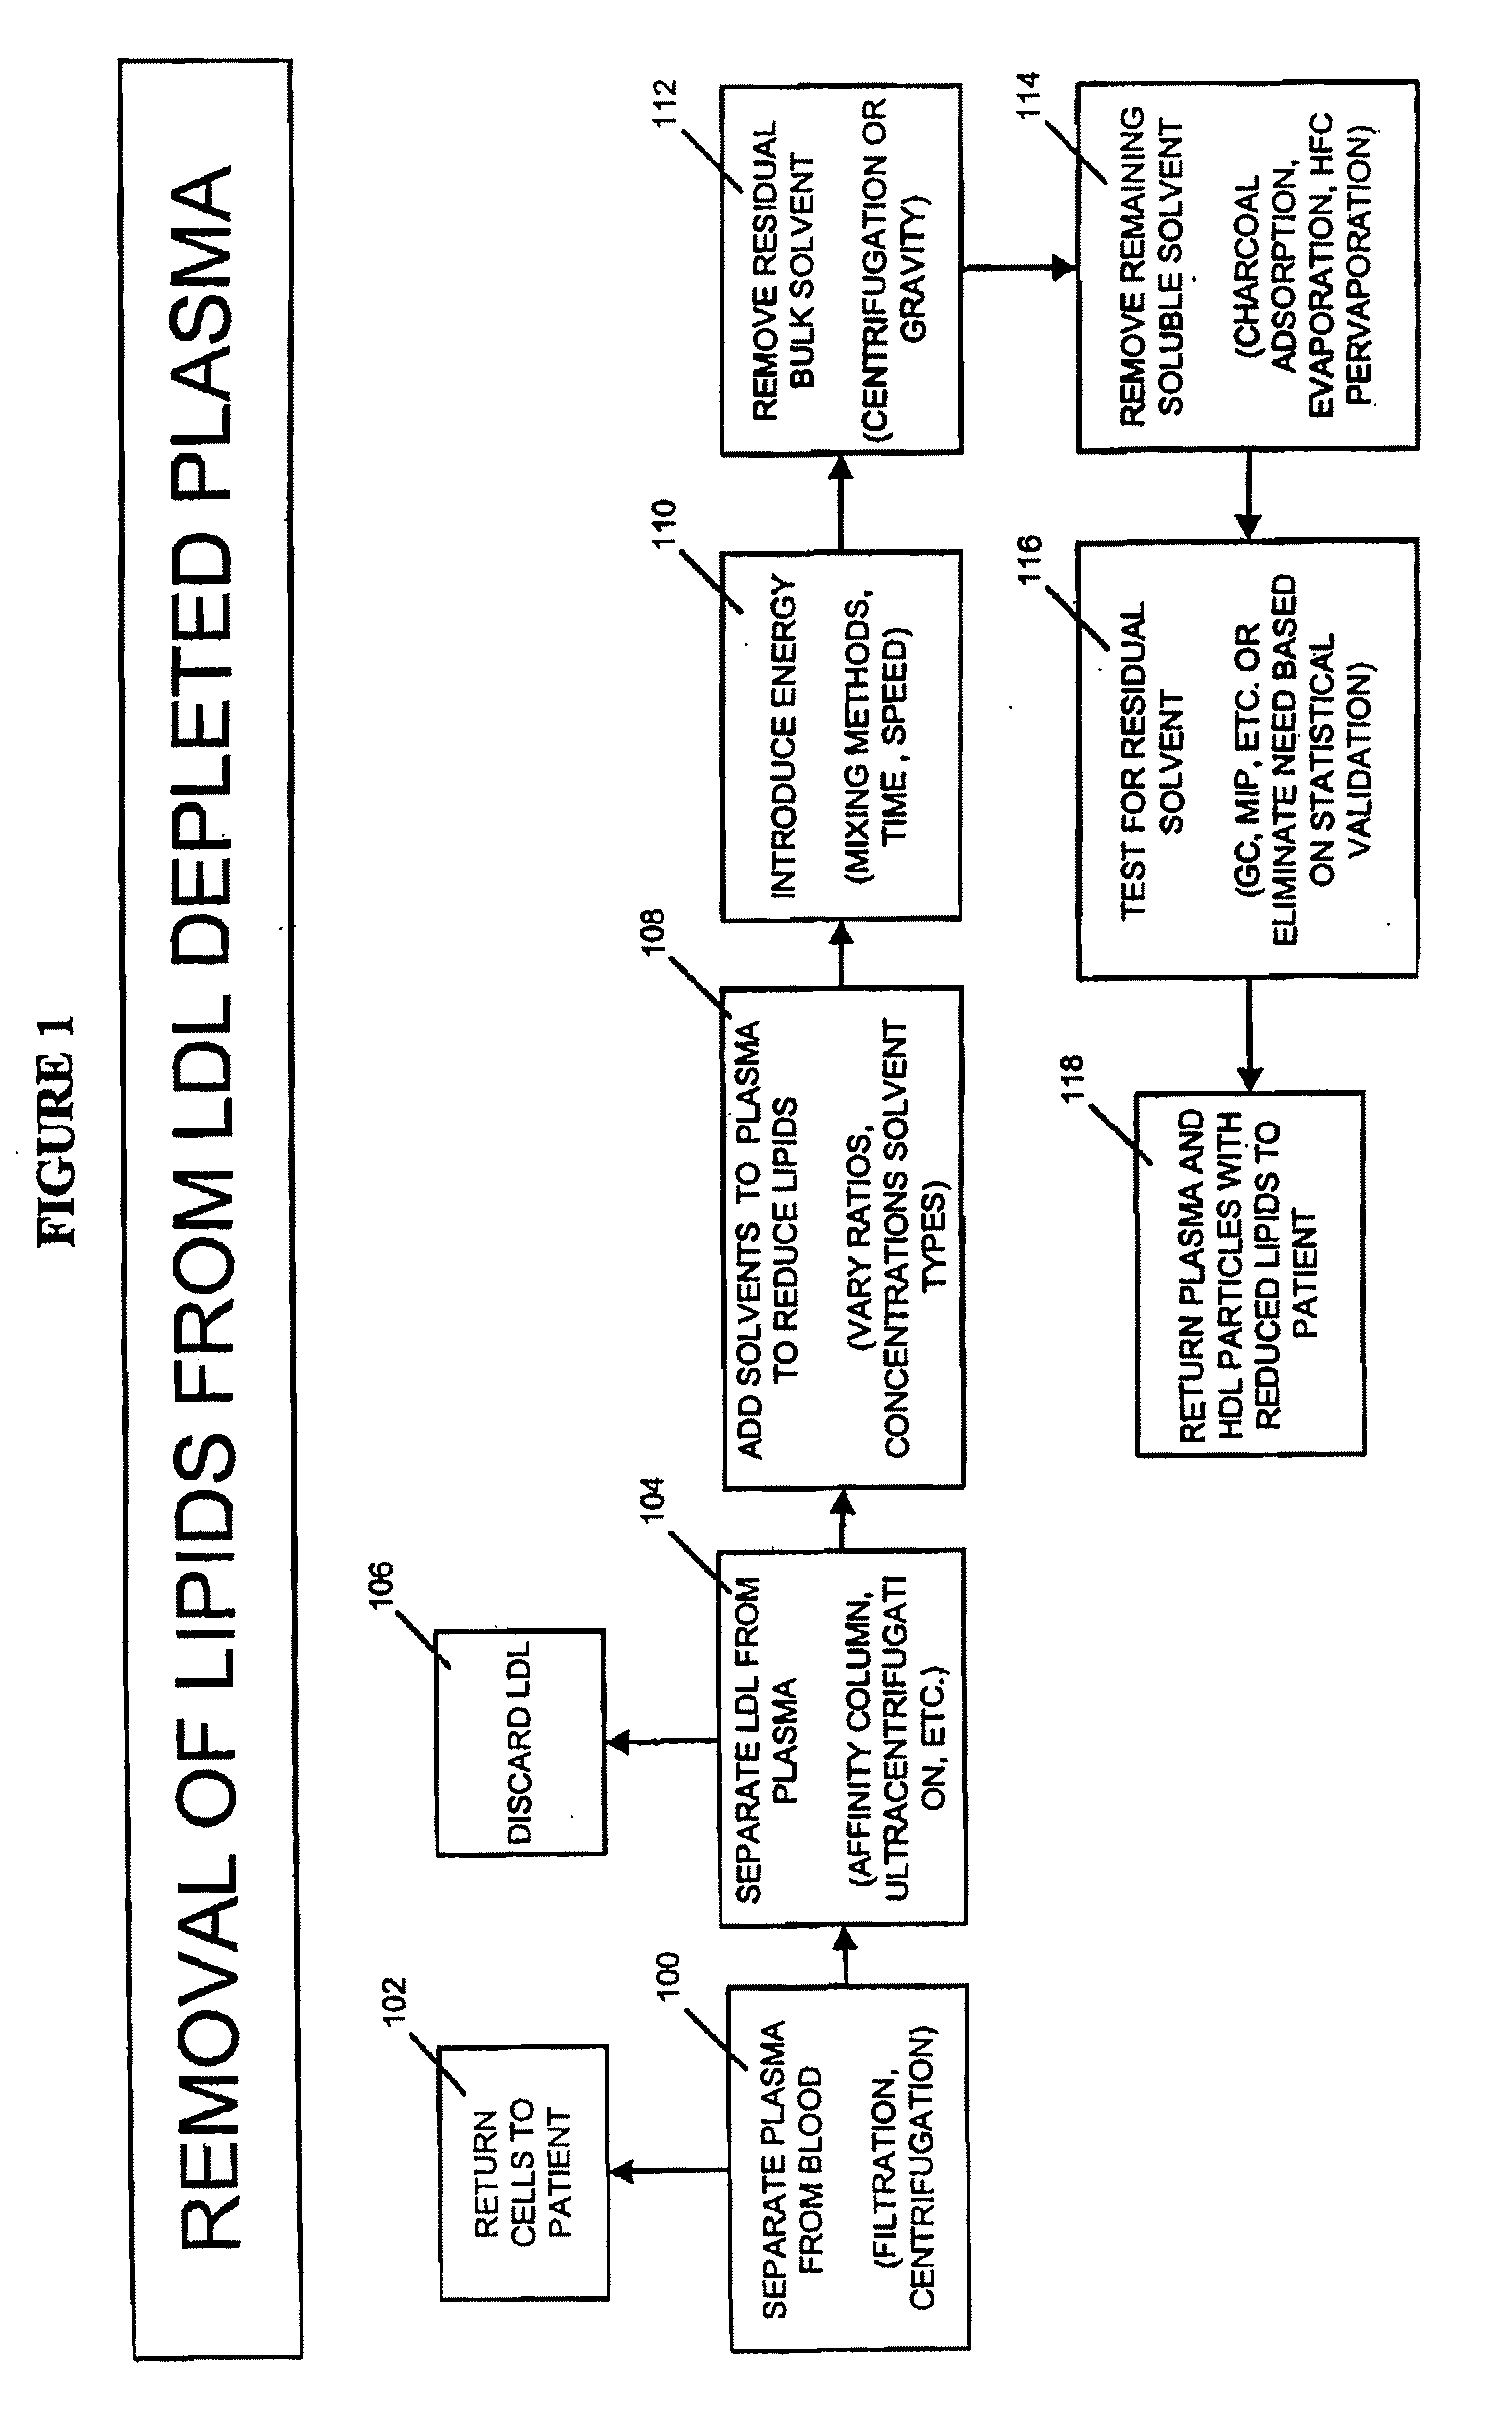 Methods and Apparatus for Creating Particle Derivatives of HDL with Reduced Lipid Content